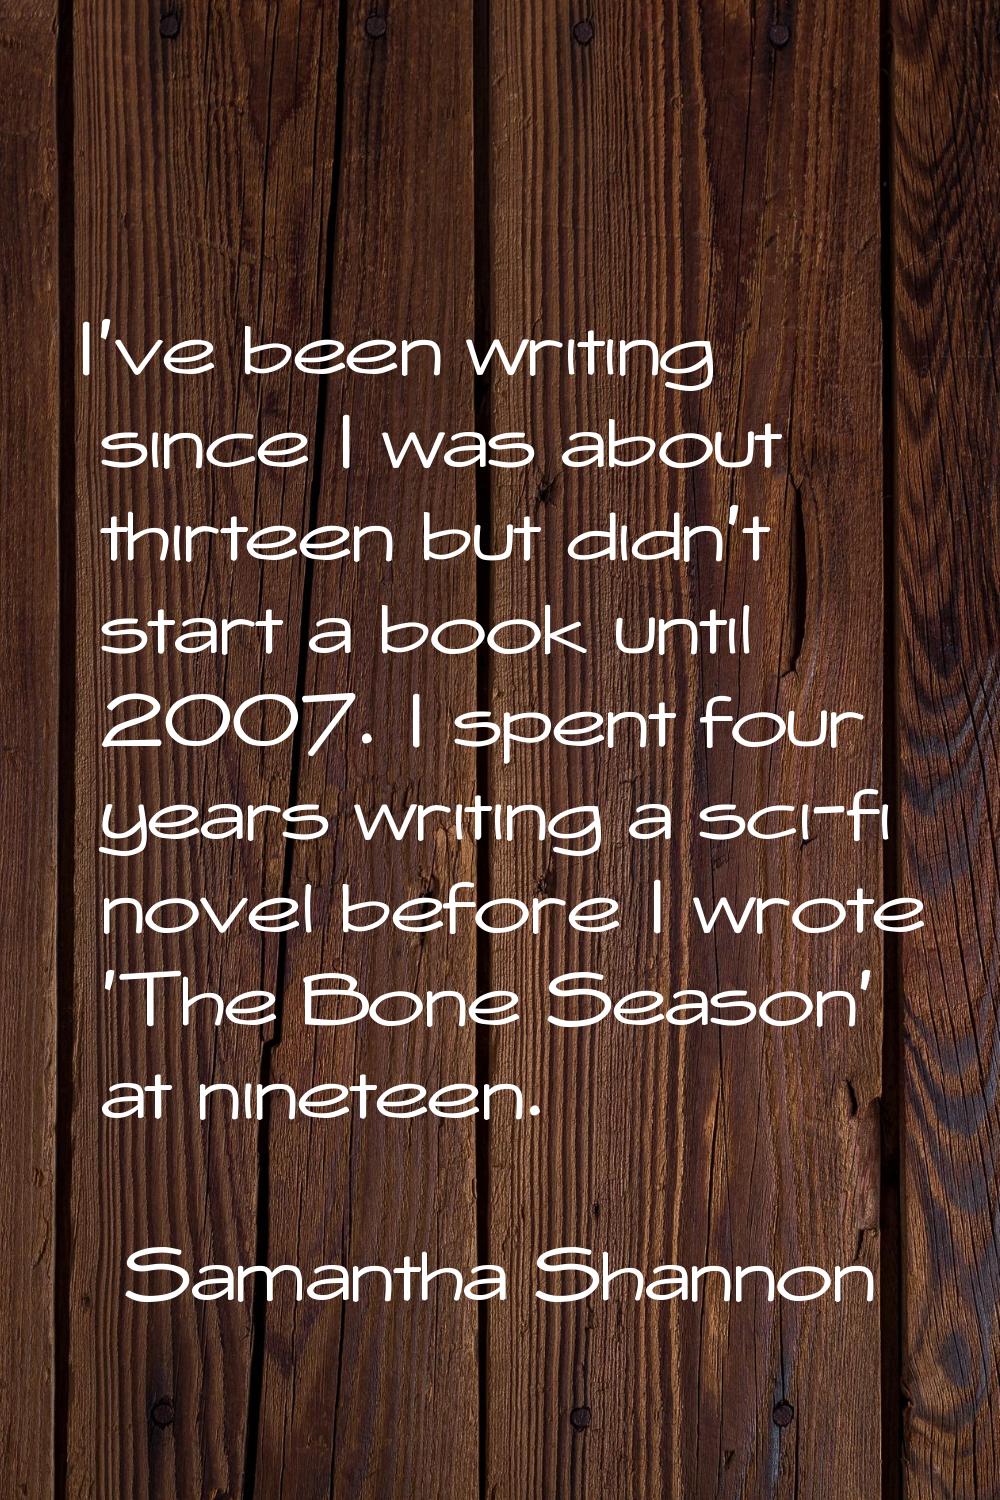 I've been writing since I was about thirteen but didn't start a book until 2007. I spent four years